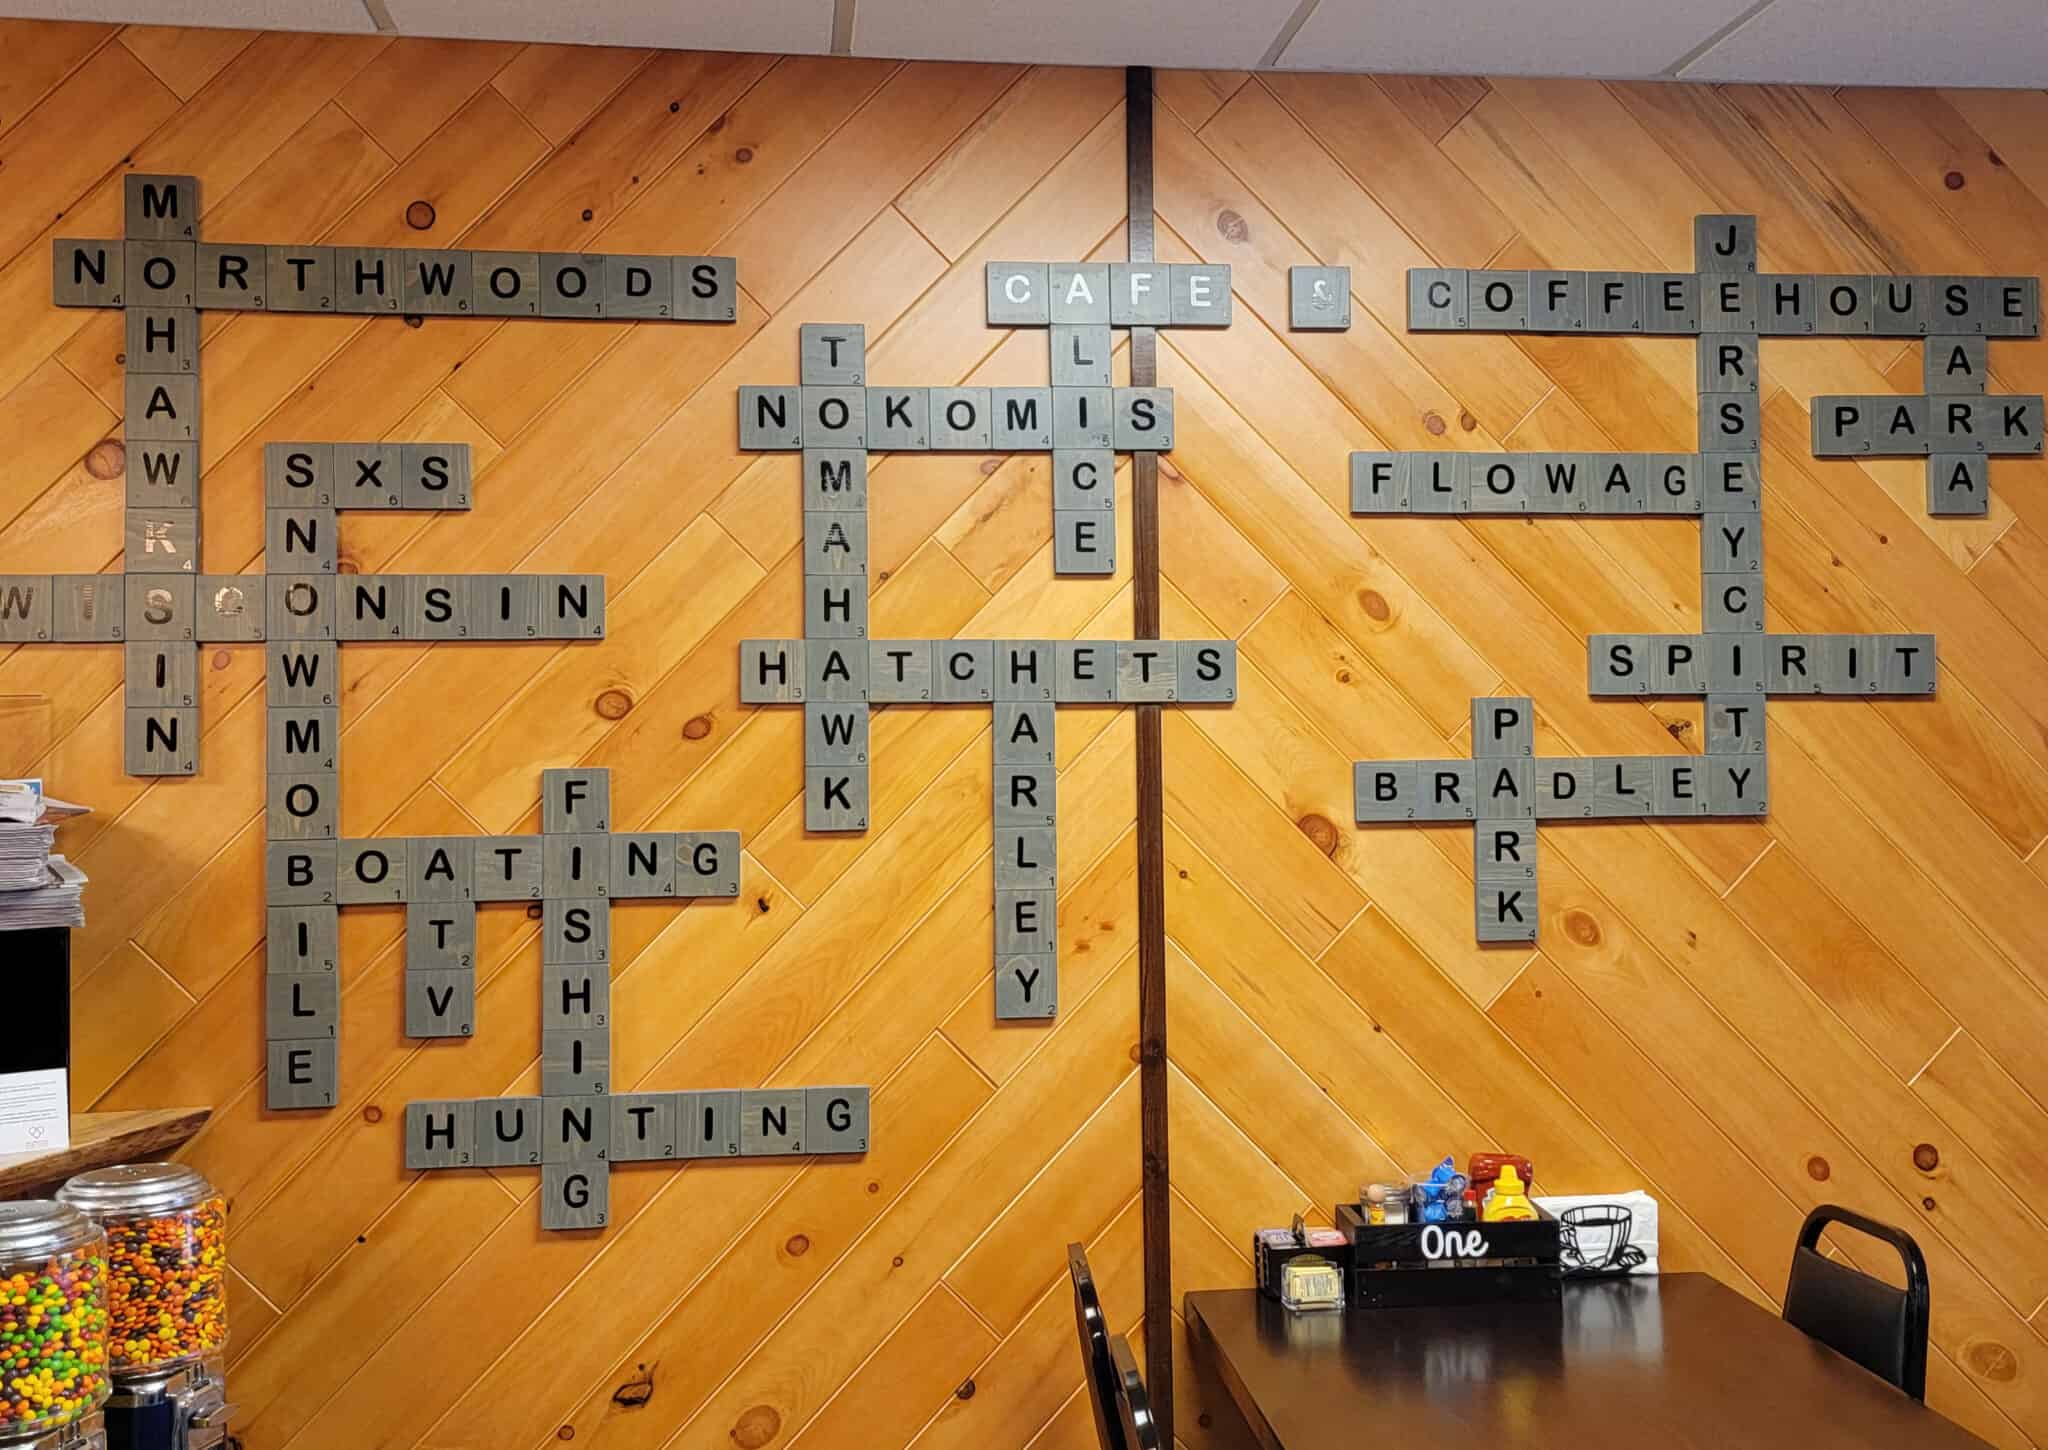 Crossword puzzle wall display at Northwoods Café and Coffeehouse highlights Tomahawk area